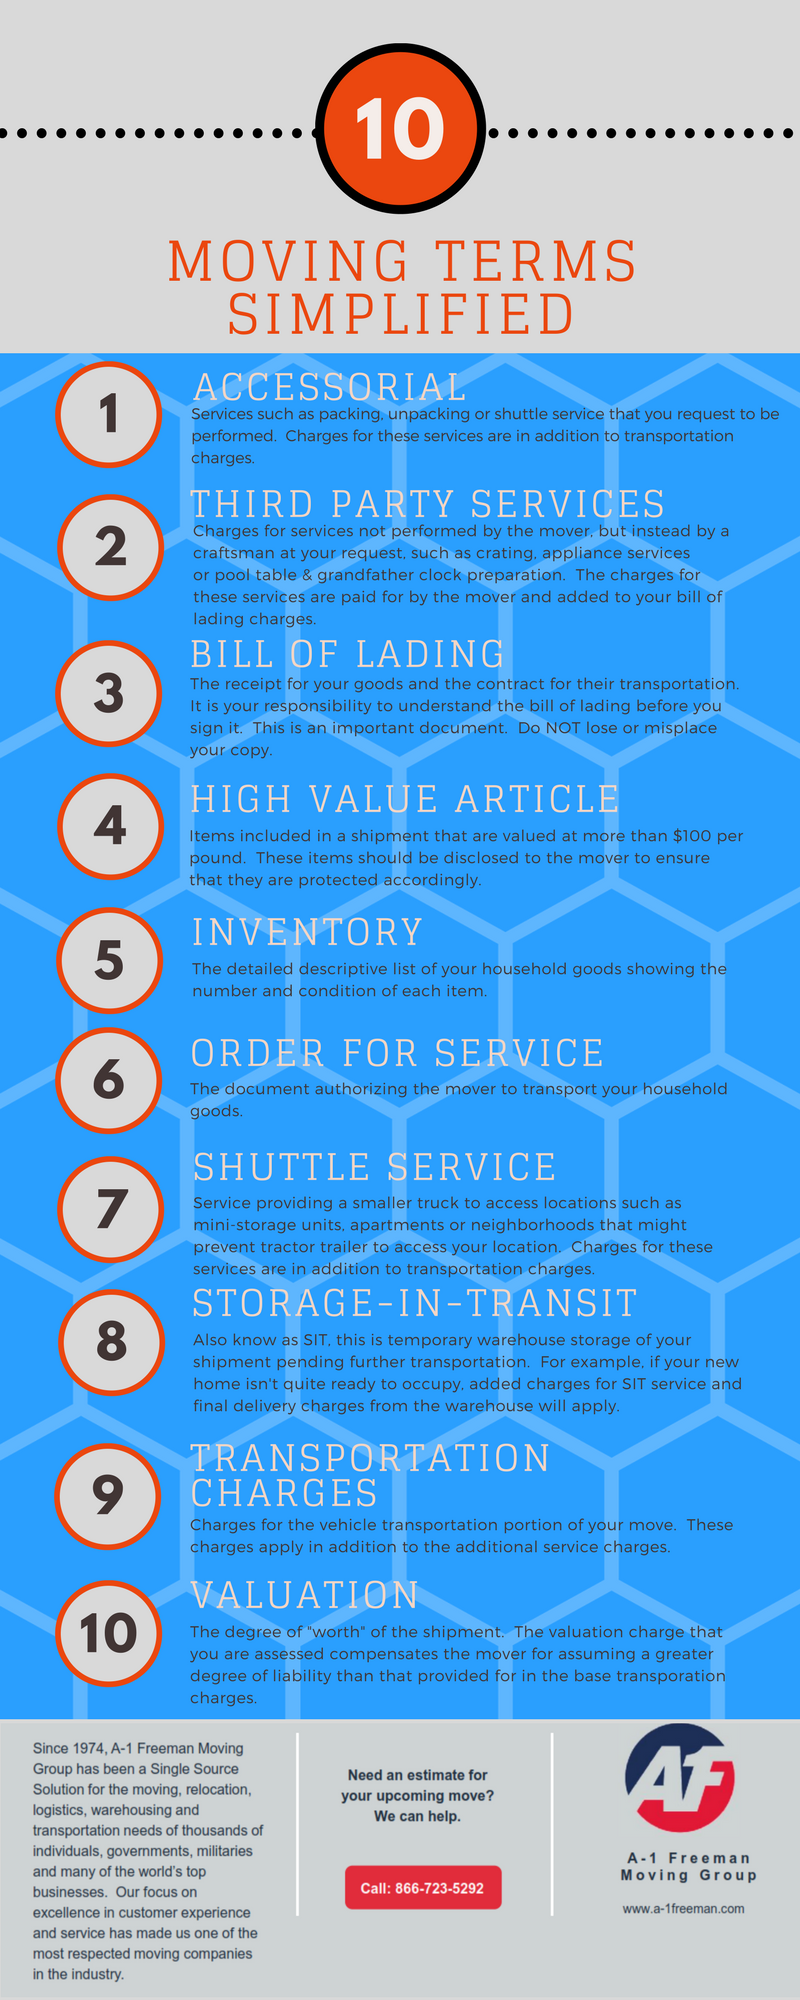 A-1 Freeman Moving Group Atlanta Moving Terms Infographic